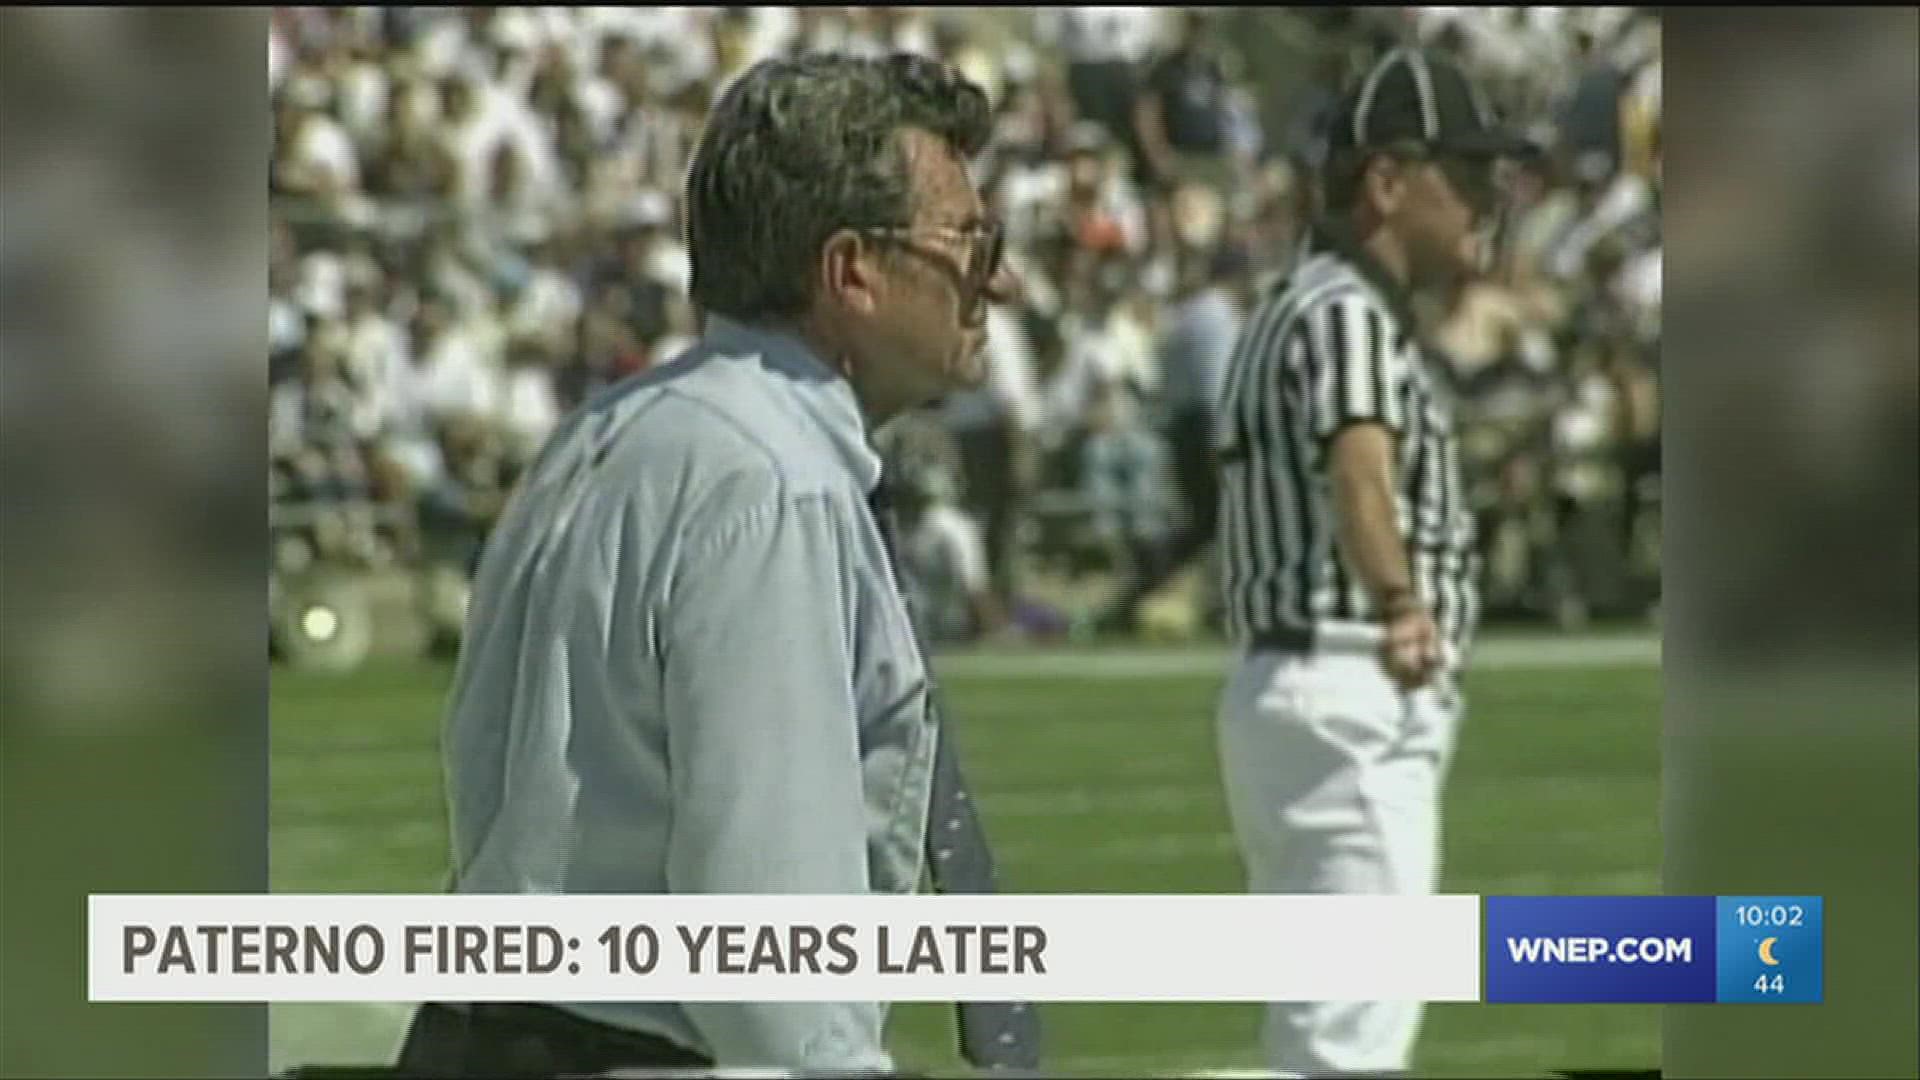 Ten years ago this week, legendary Penn State Head Football Coach Joe Paterno was fired amid a scandal involving former assistant coach Jerry Sandusky.